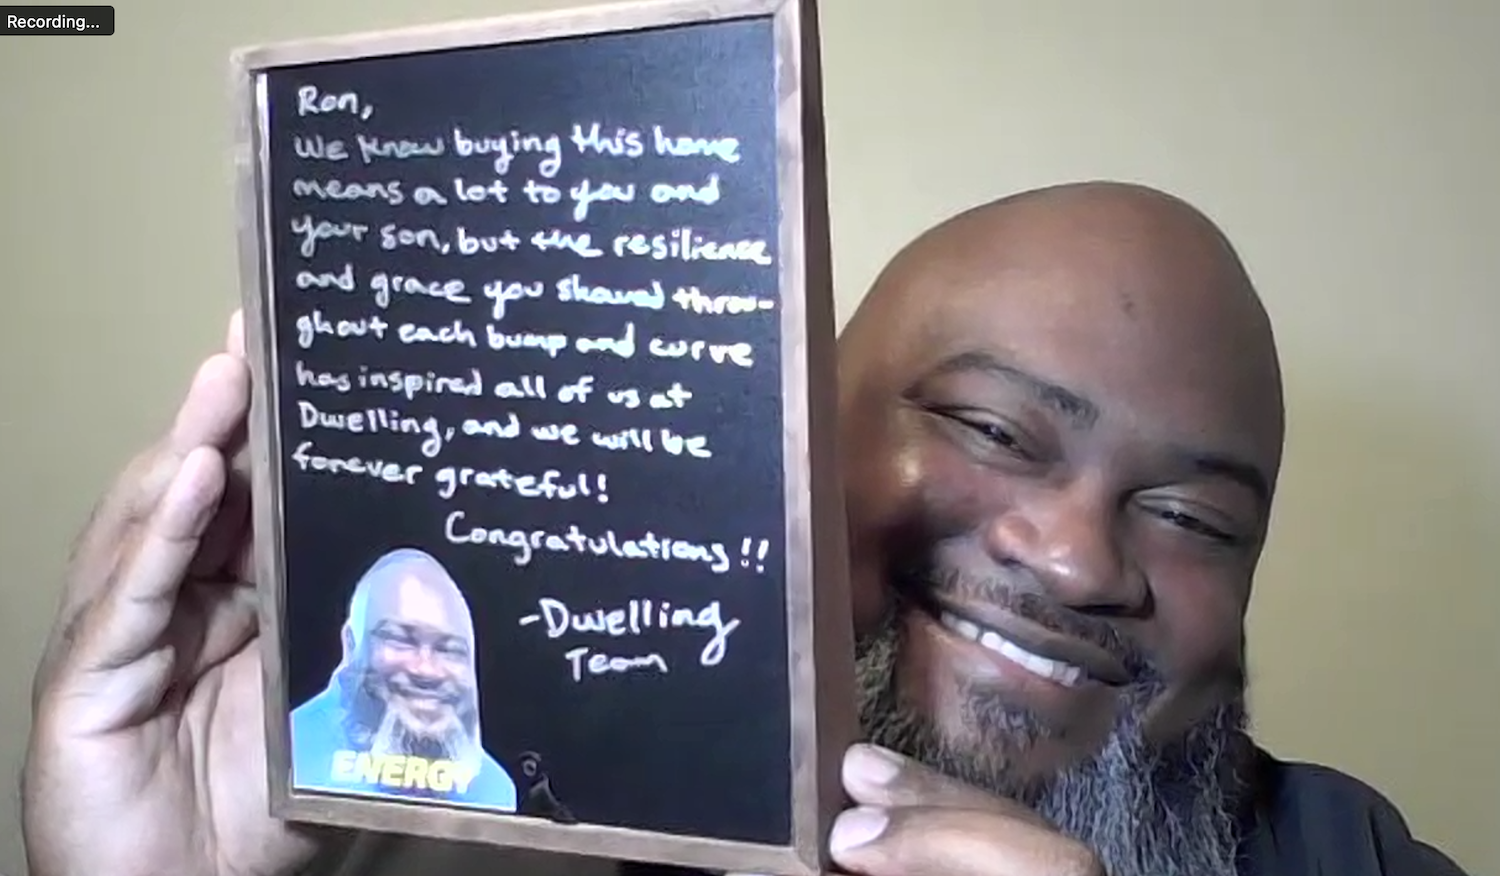 Photo of Ron holding a frame with a personal message from the Dwelling team.